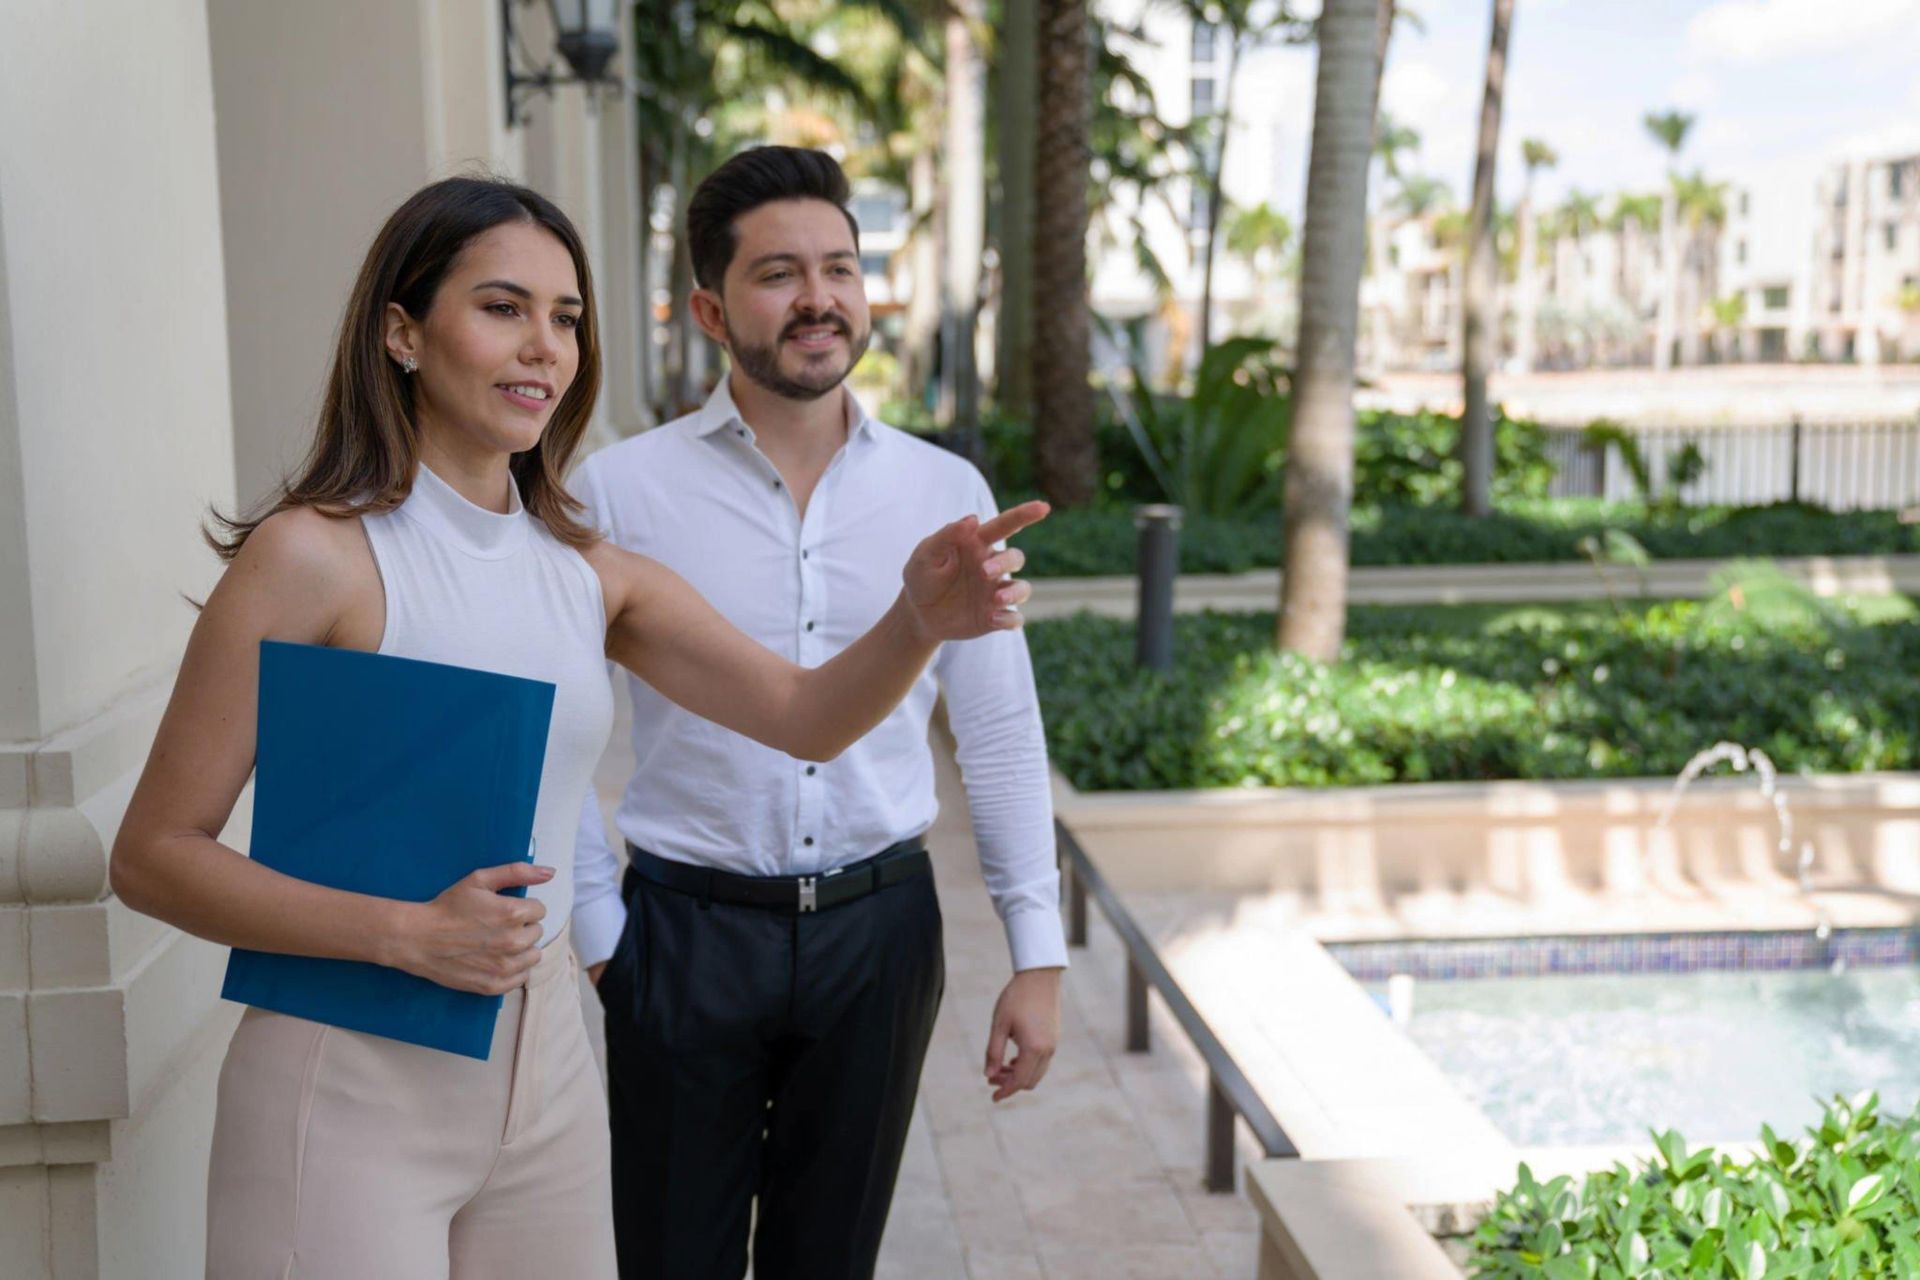 Two professionals discussing real estate, woman pointing, man in white shirt, woman with blue folder, plants in background.